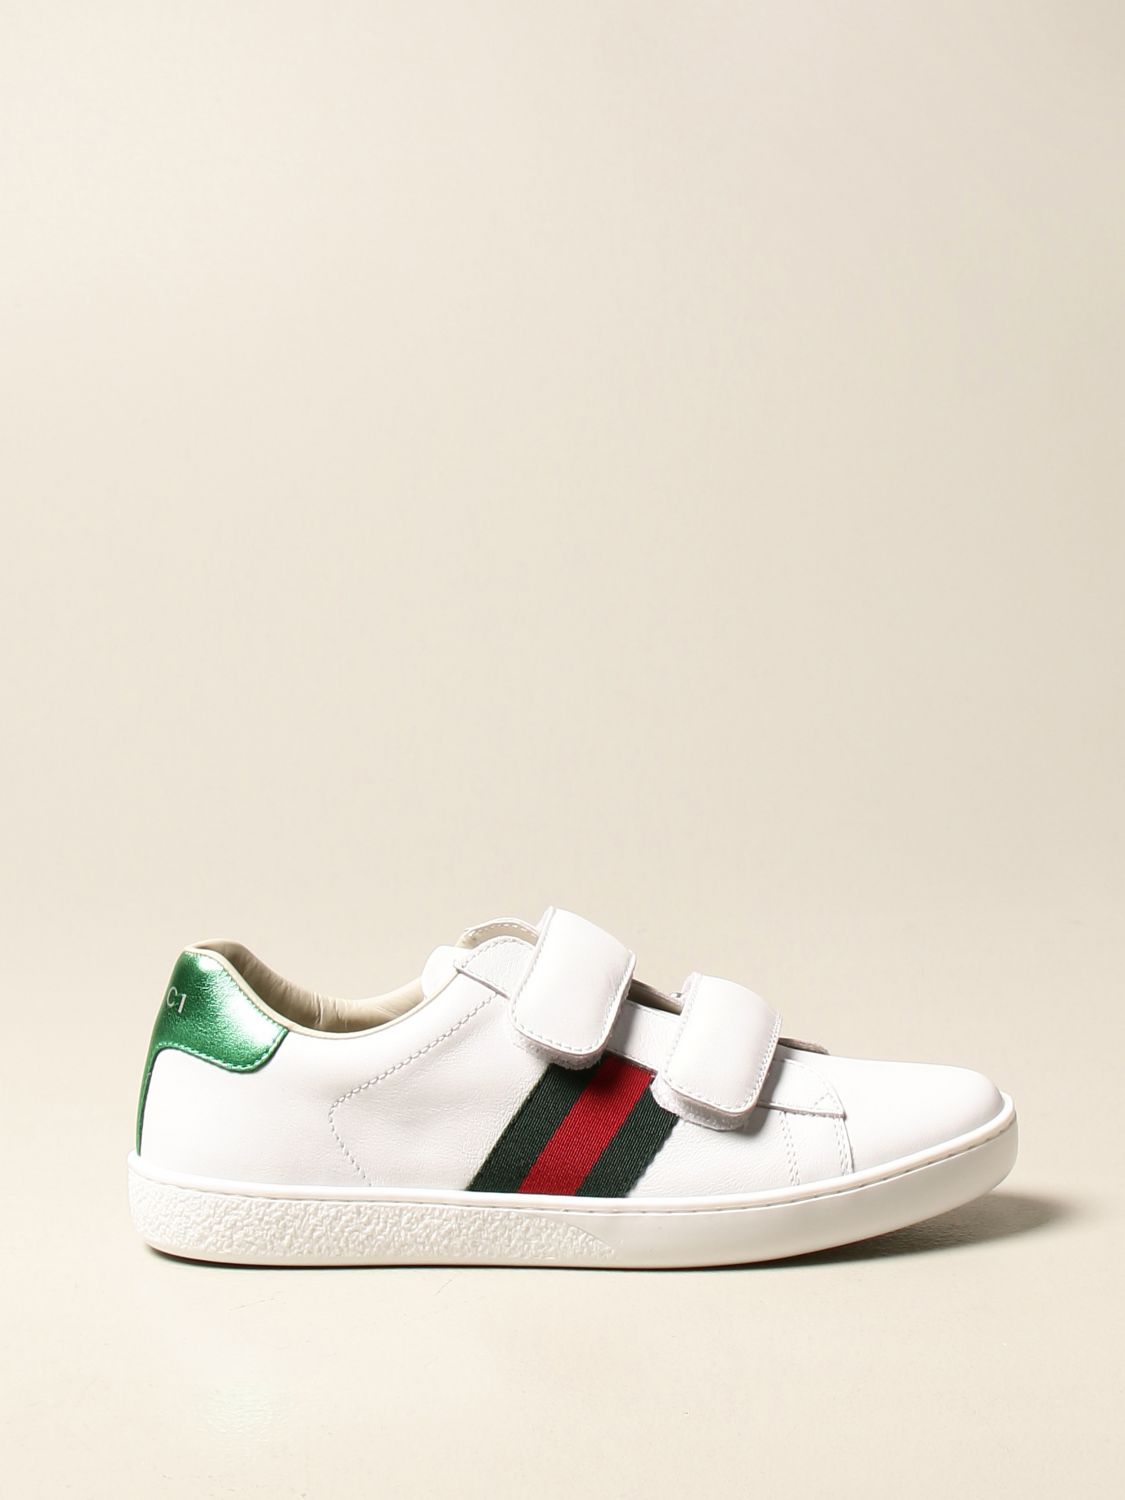 GUCCI: Ace sneakers in leather with Web bands - White | Gucci shoes ...